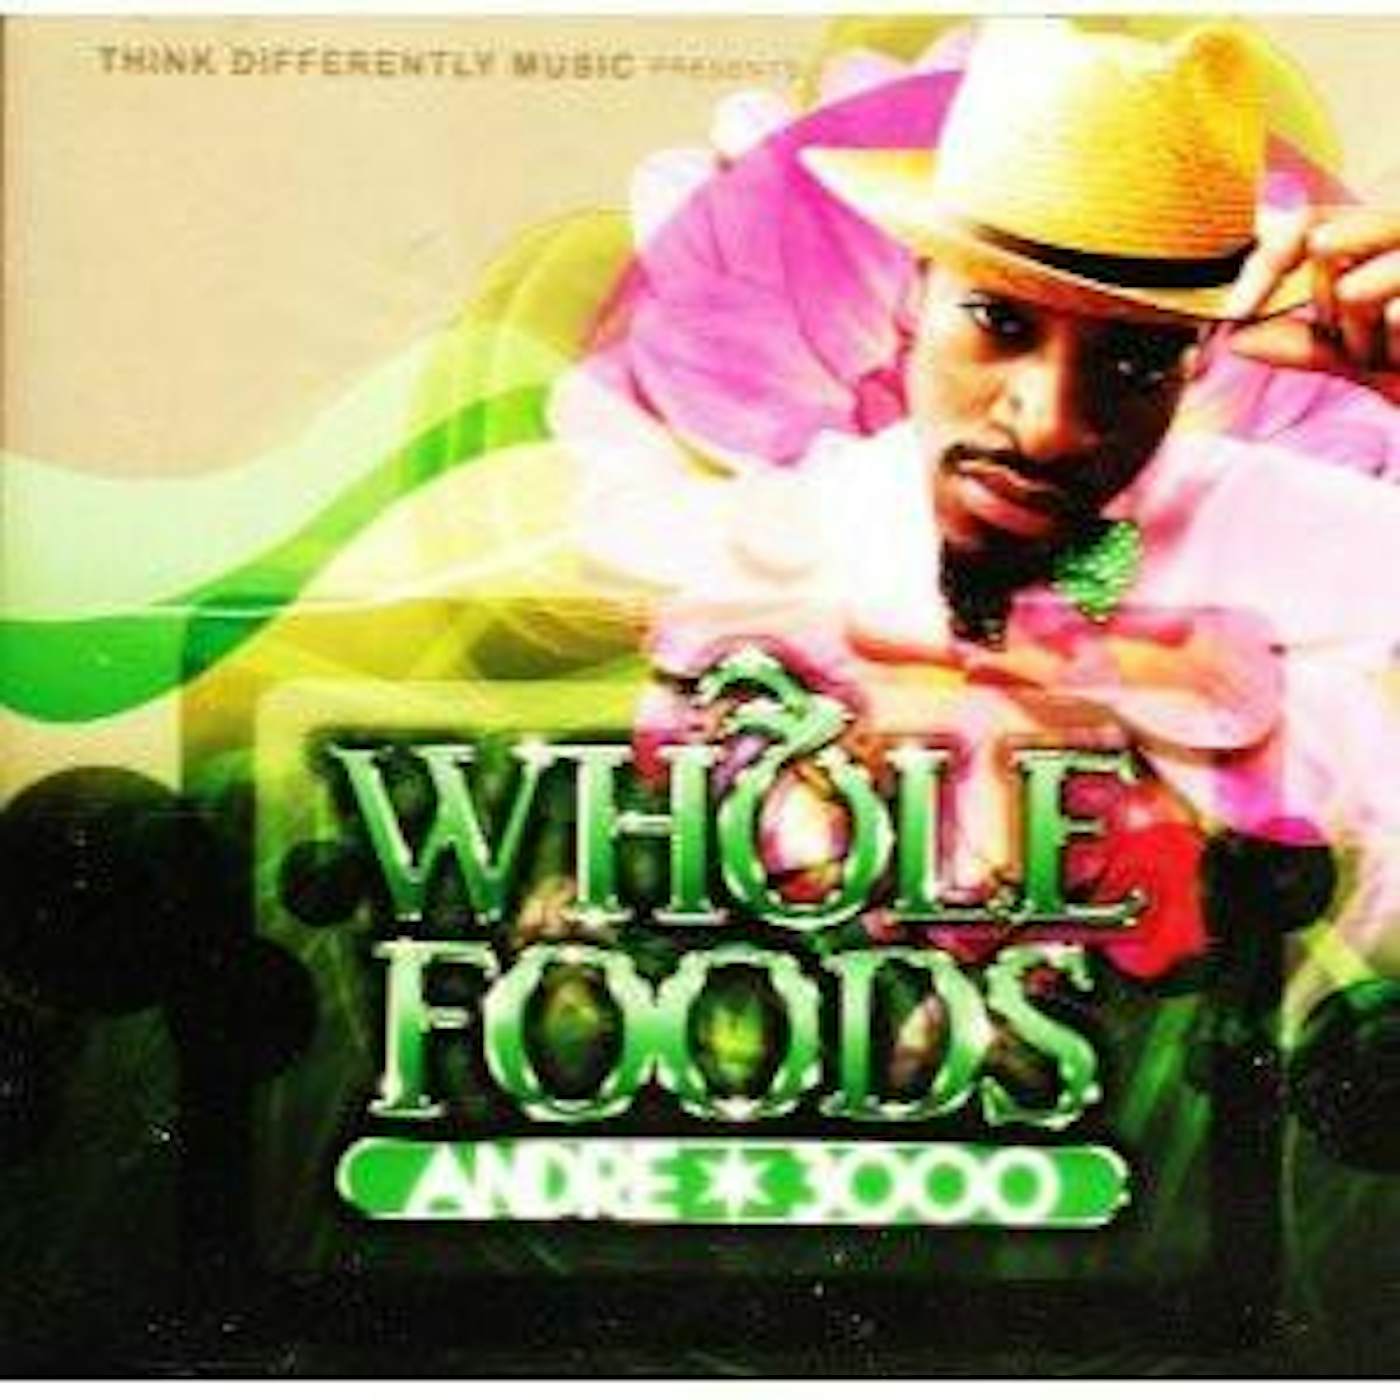 André 3000 WHOLE FOODS CD